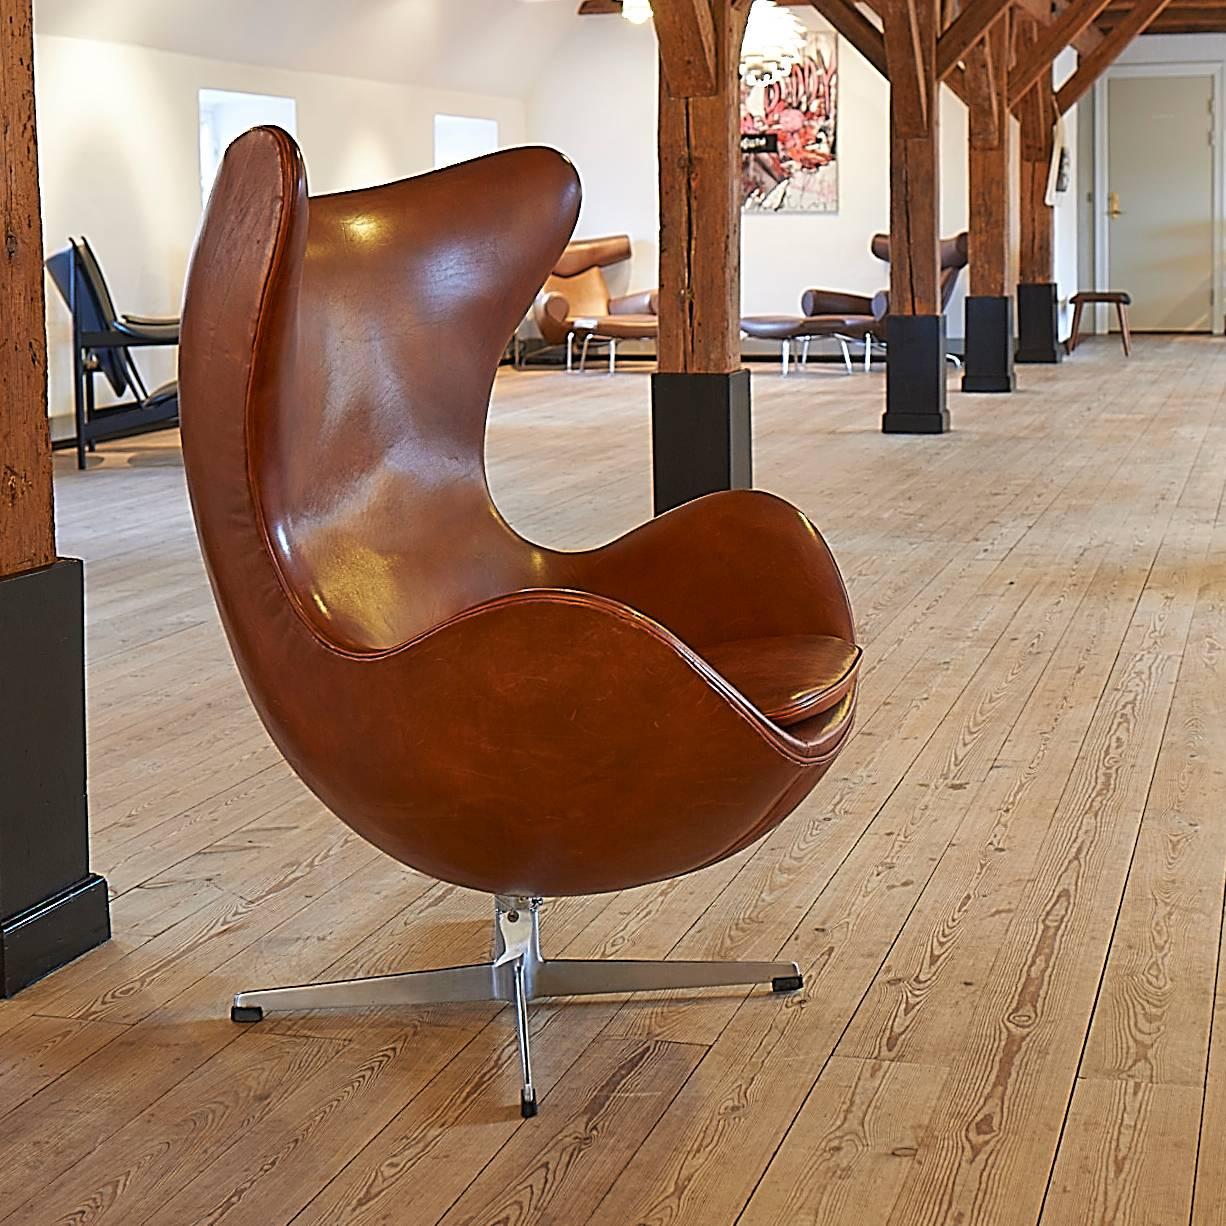 Danish Original Arne Jacobsen Egg with Ottoman from the 1960s For Sale